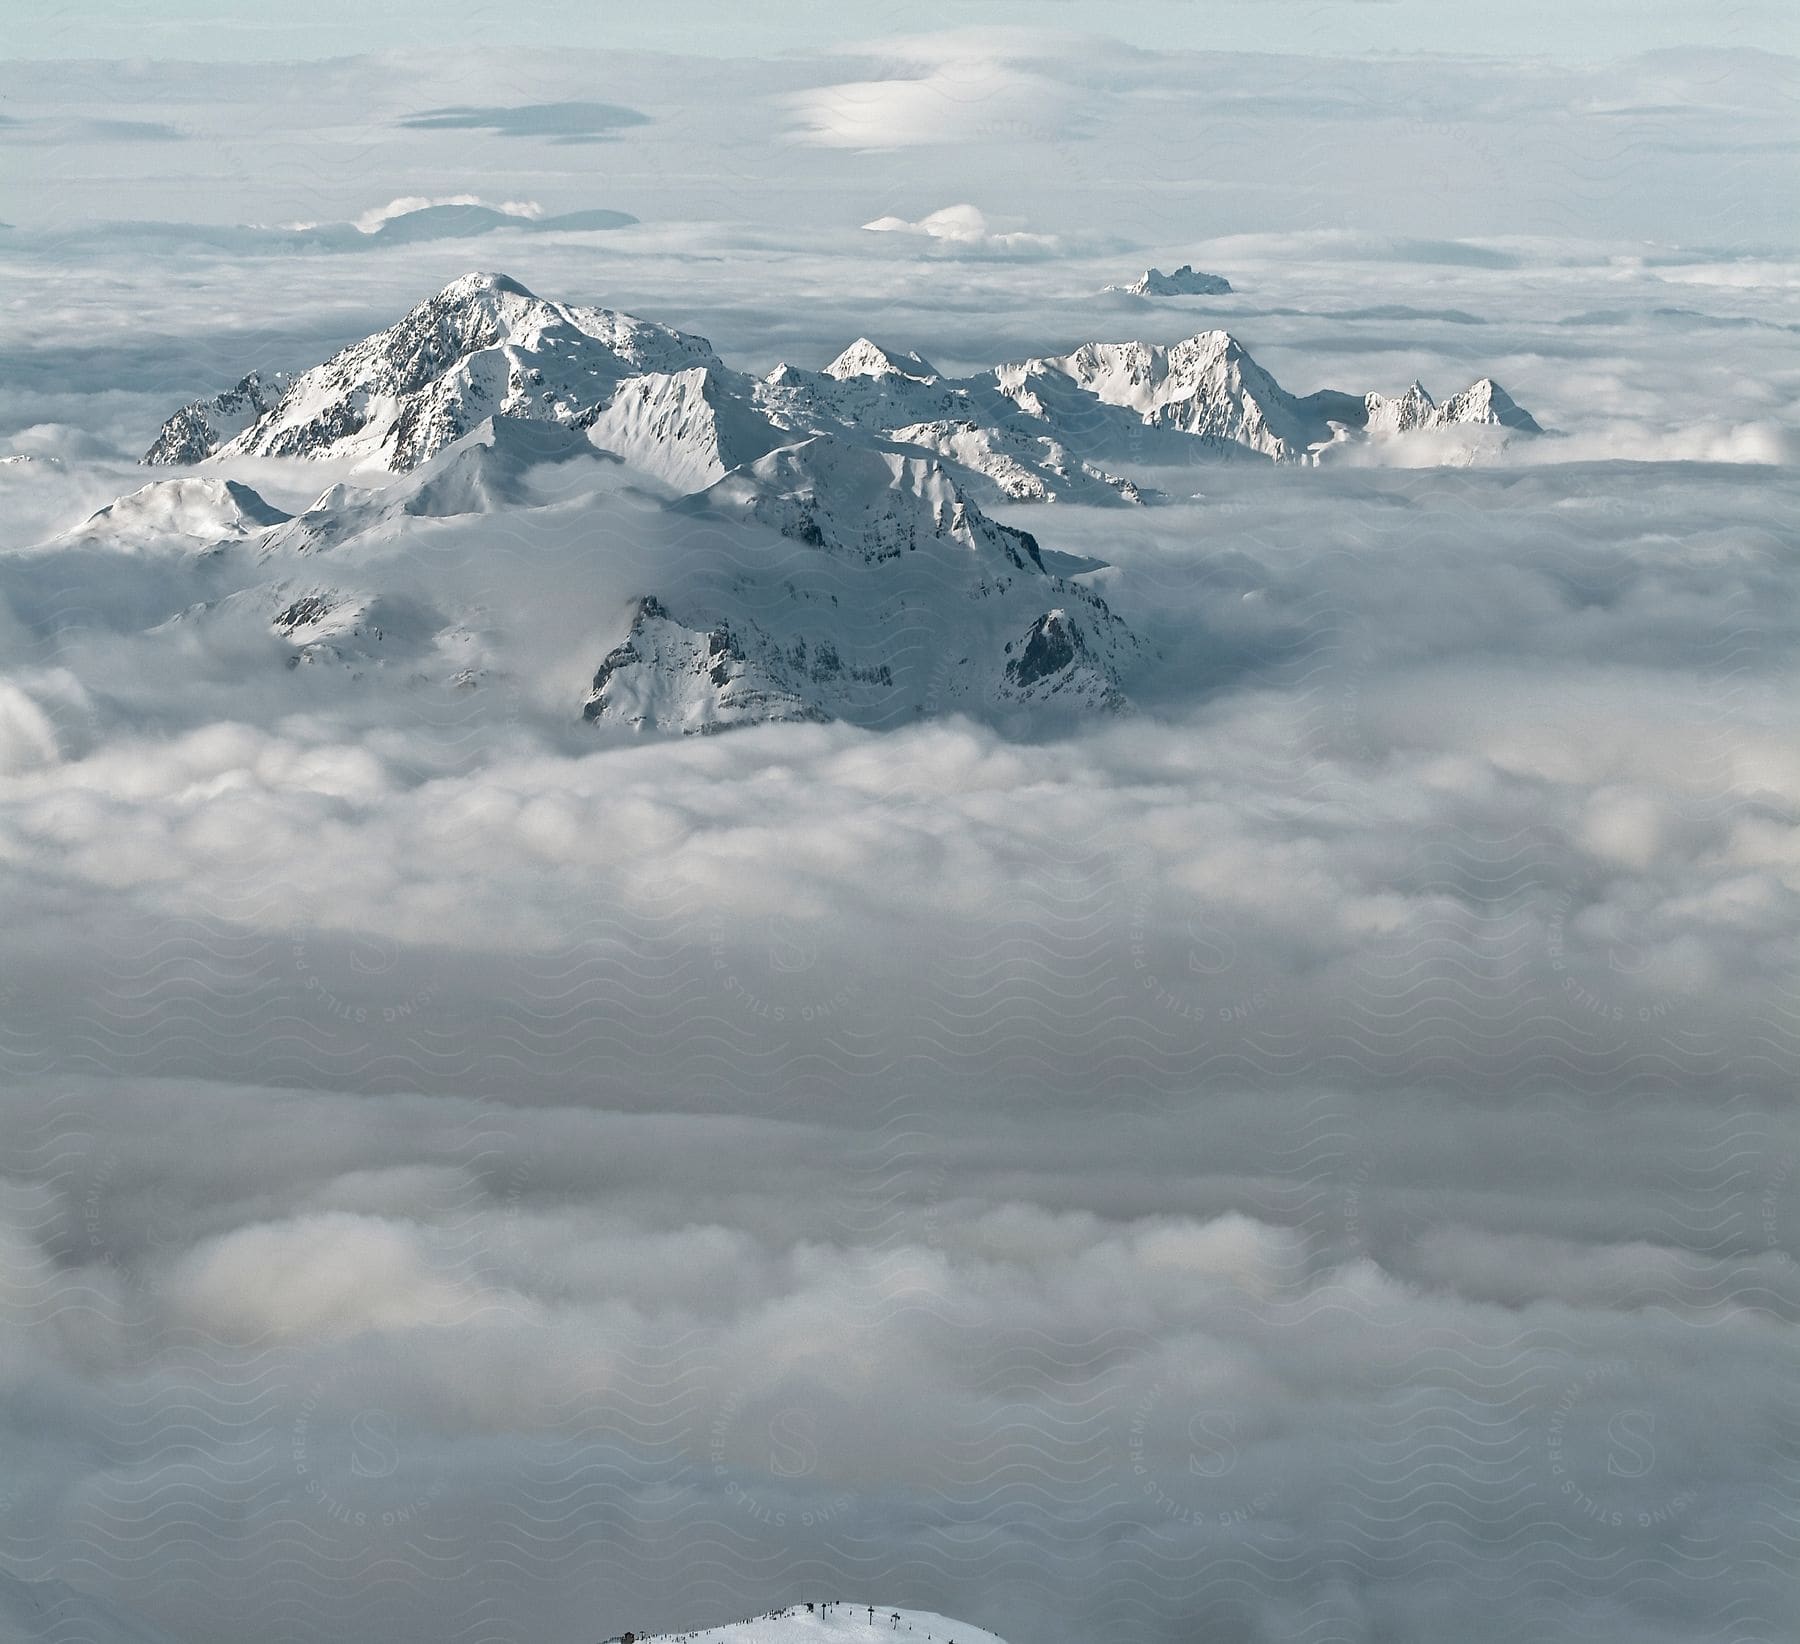 Snow-capped mountain peaks emerge from the rolling clouds in the distance